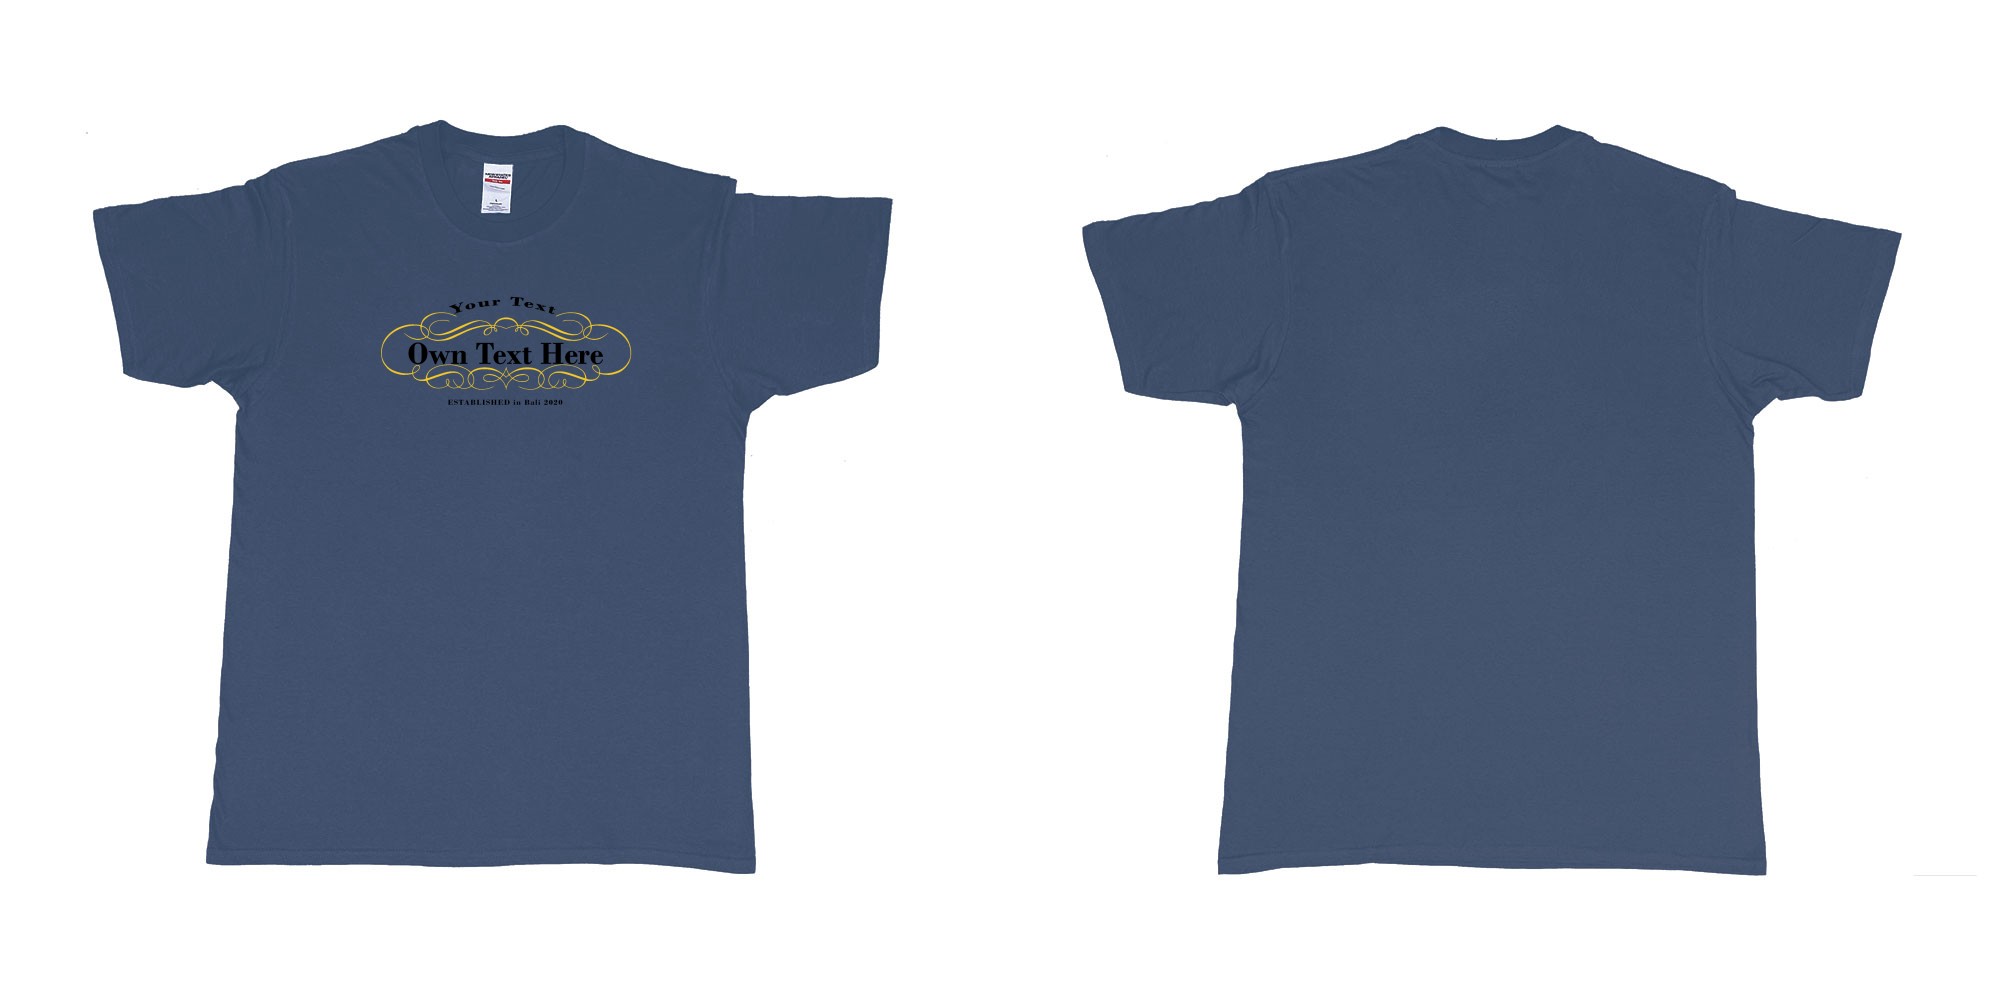 Custom tshirt design Laurent perrier in fabric color navy choice your own text made in Bali by The Pirate Way